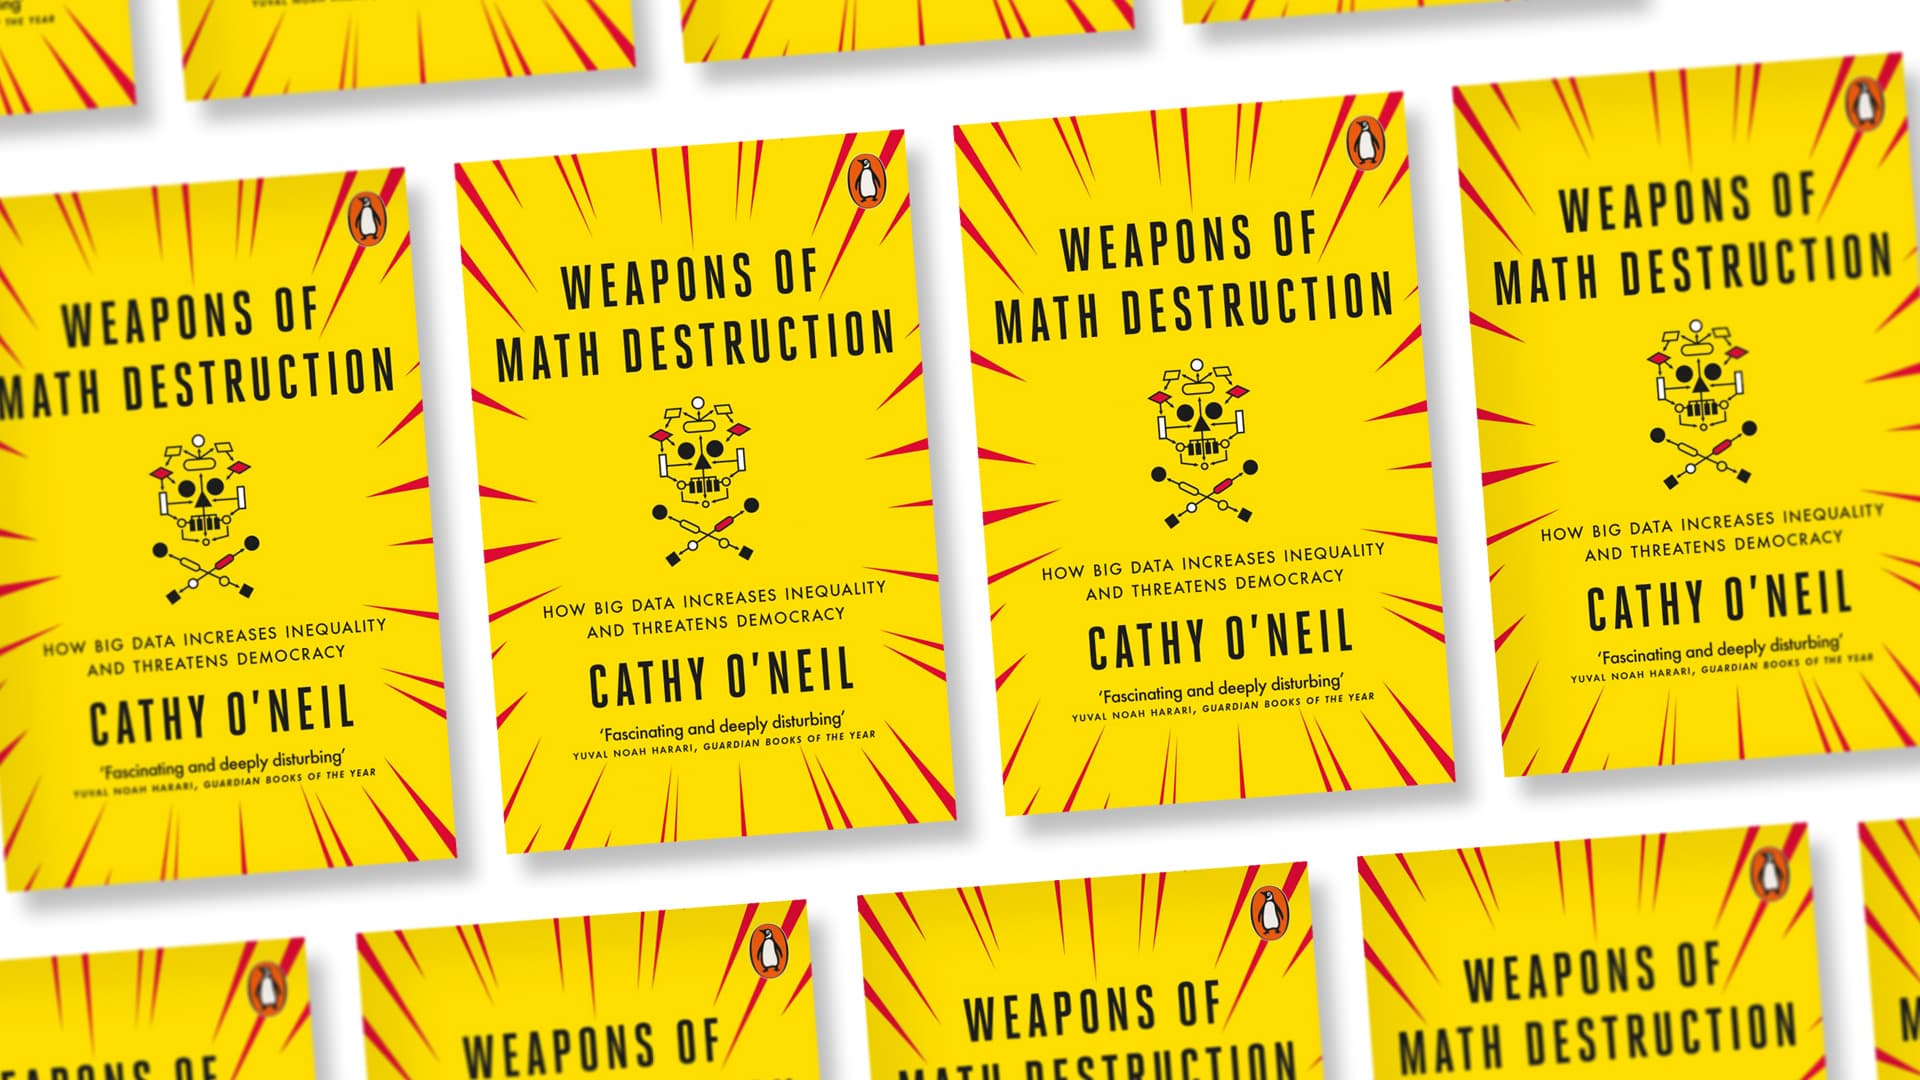 Weapons of Math Destruction book covers